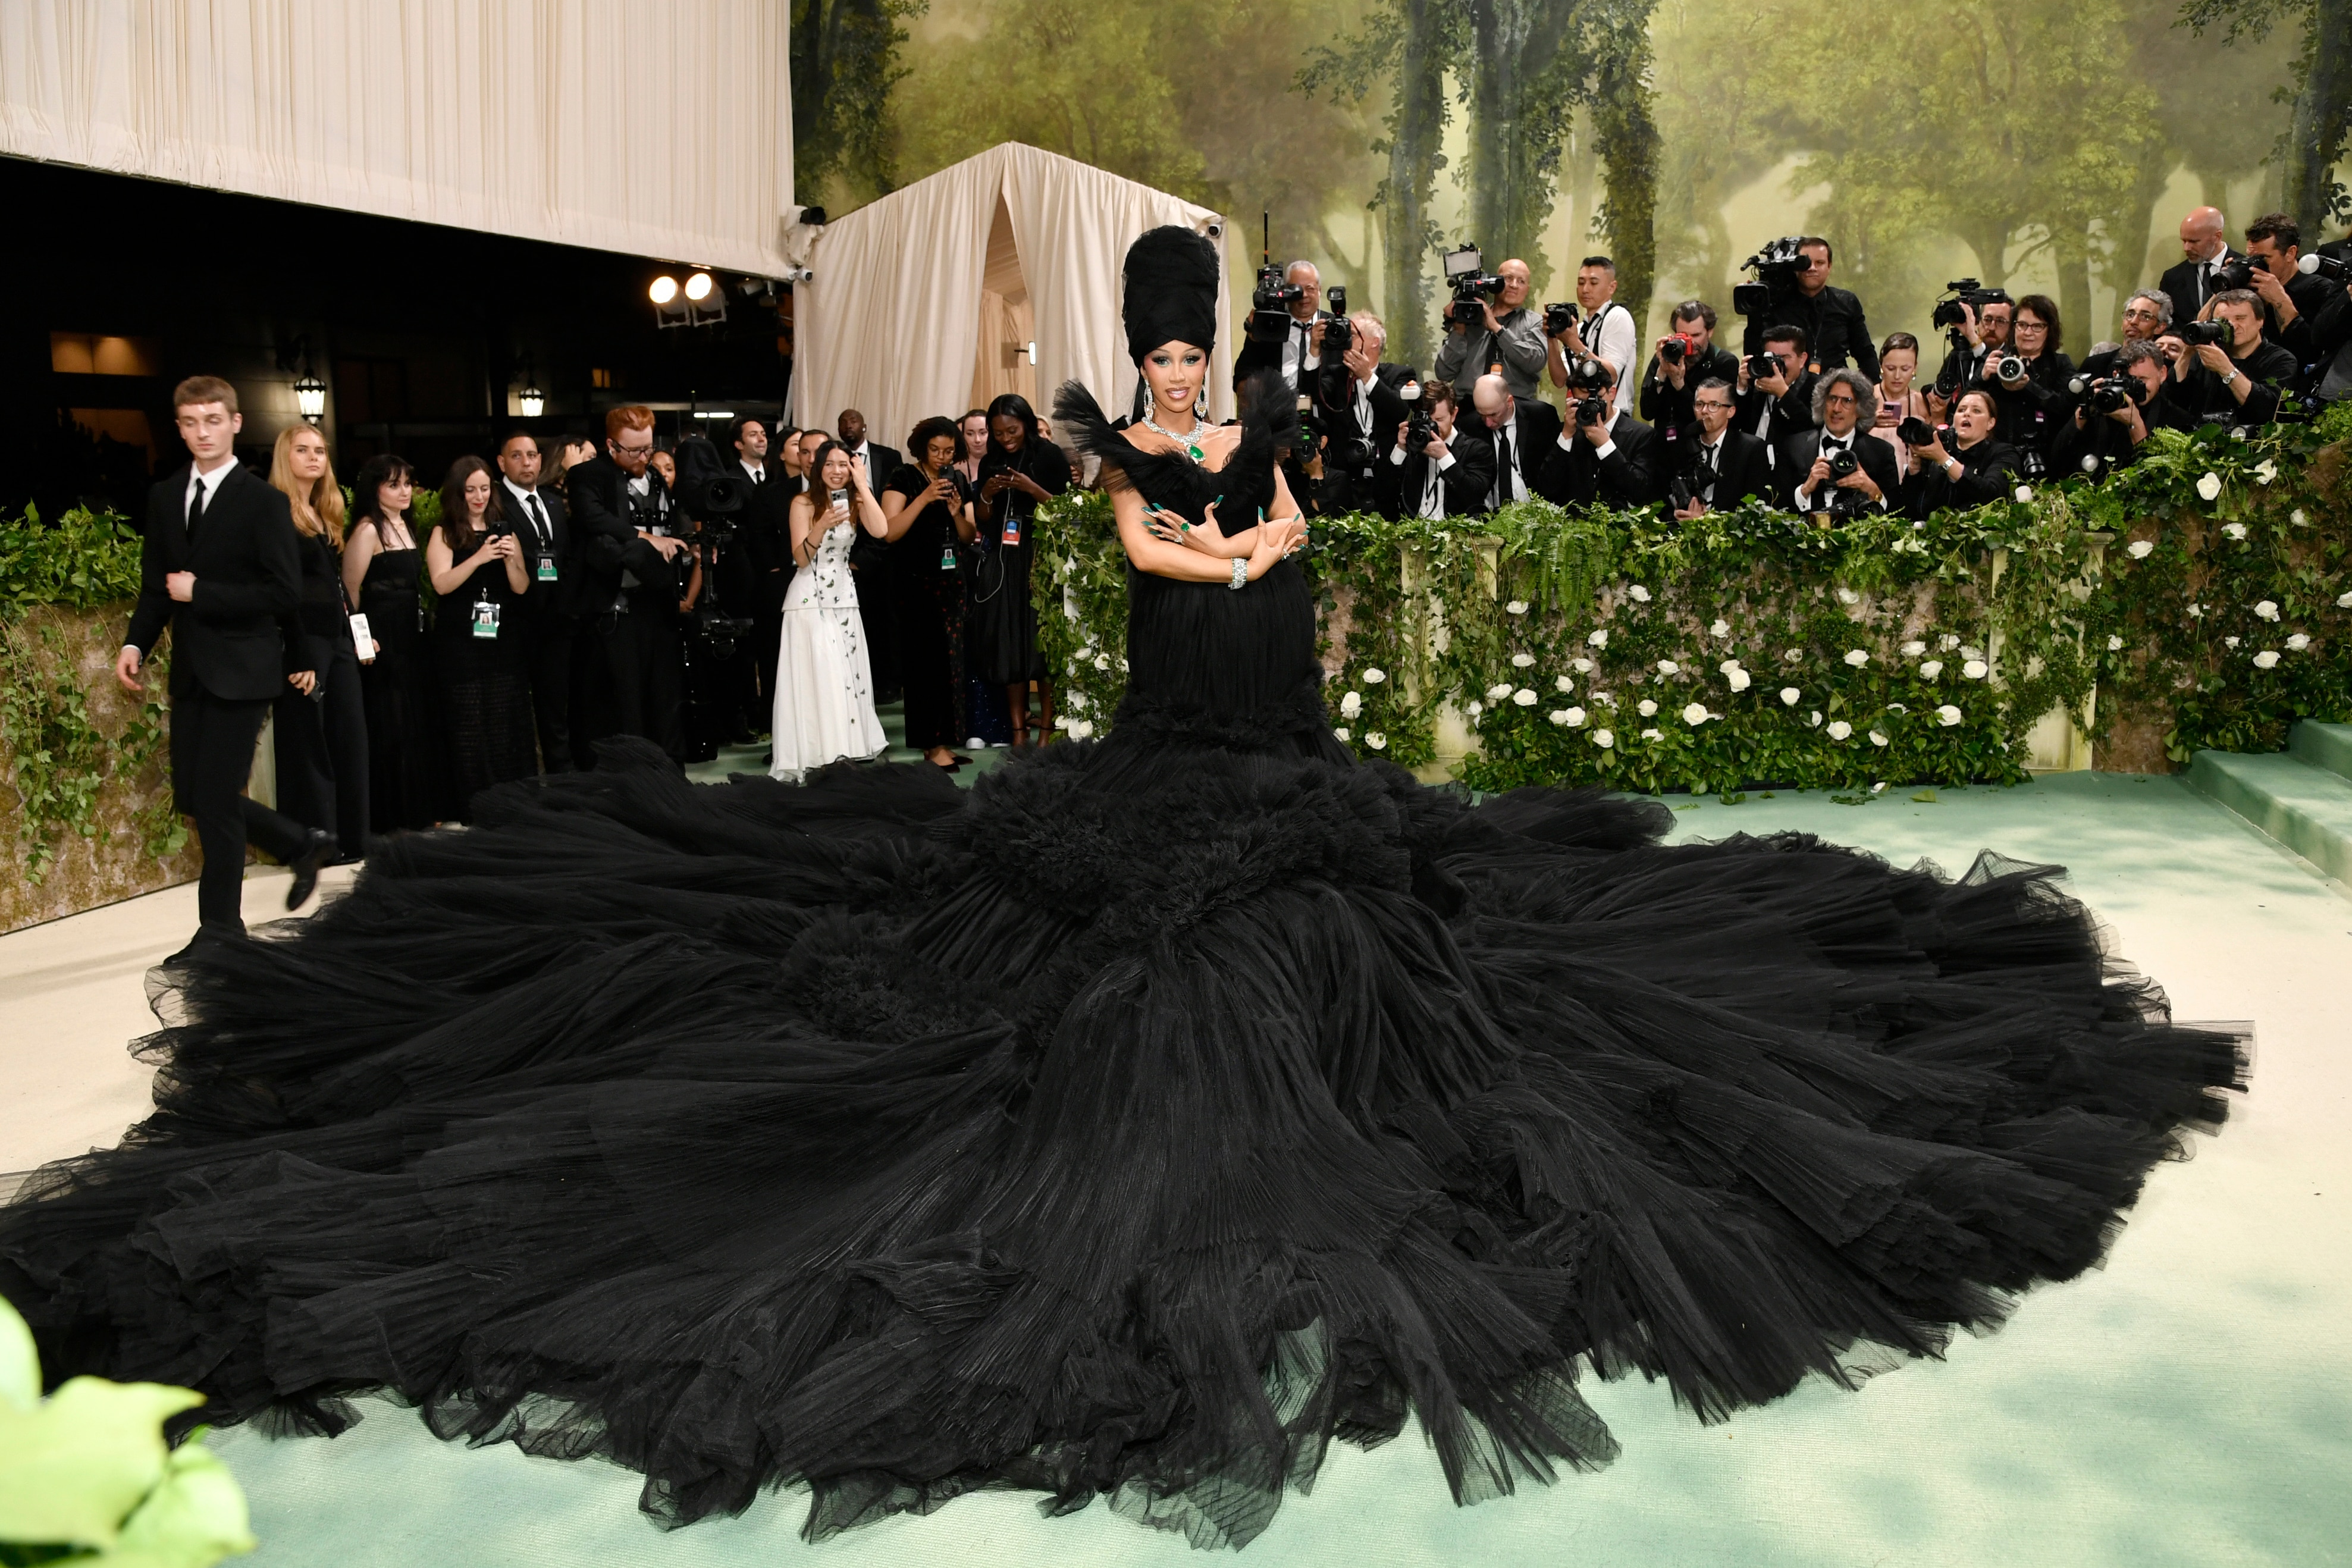 Cardi B wearing a black tulle off-the-shoulder dress with a skirt that has about a 4-metre radius.